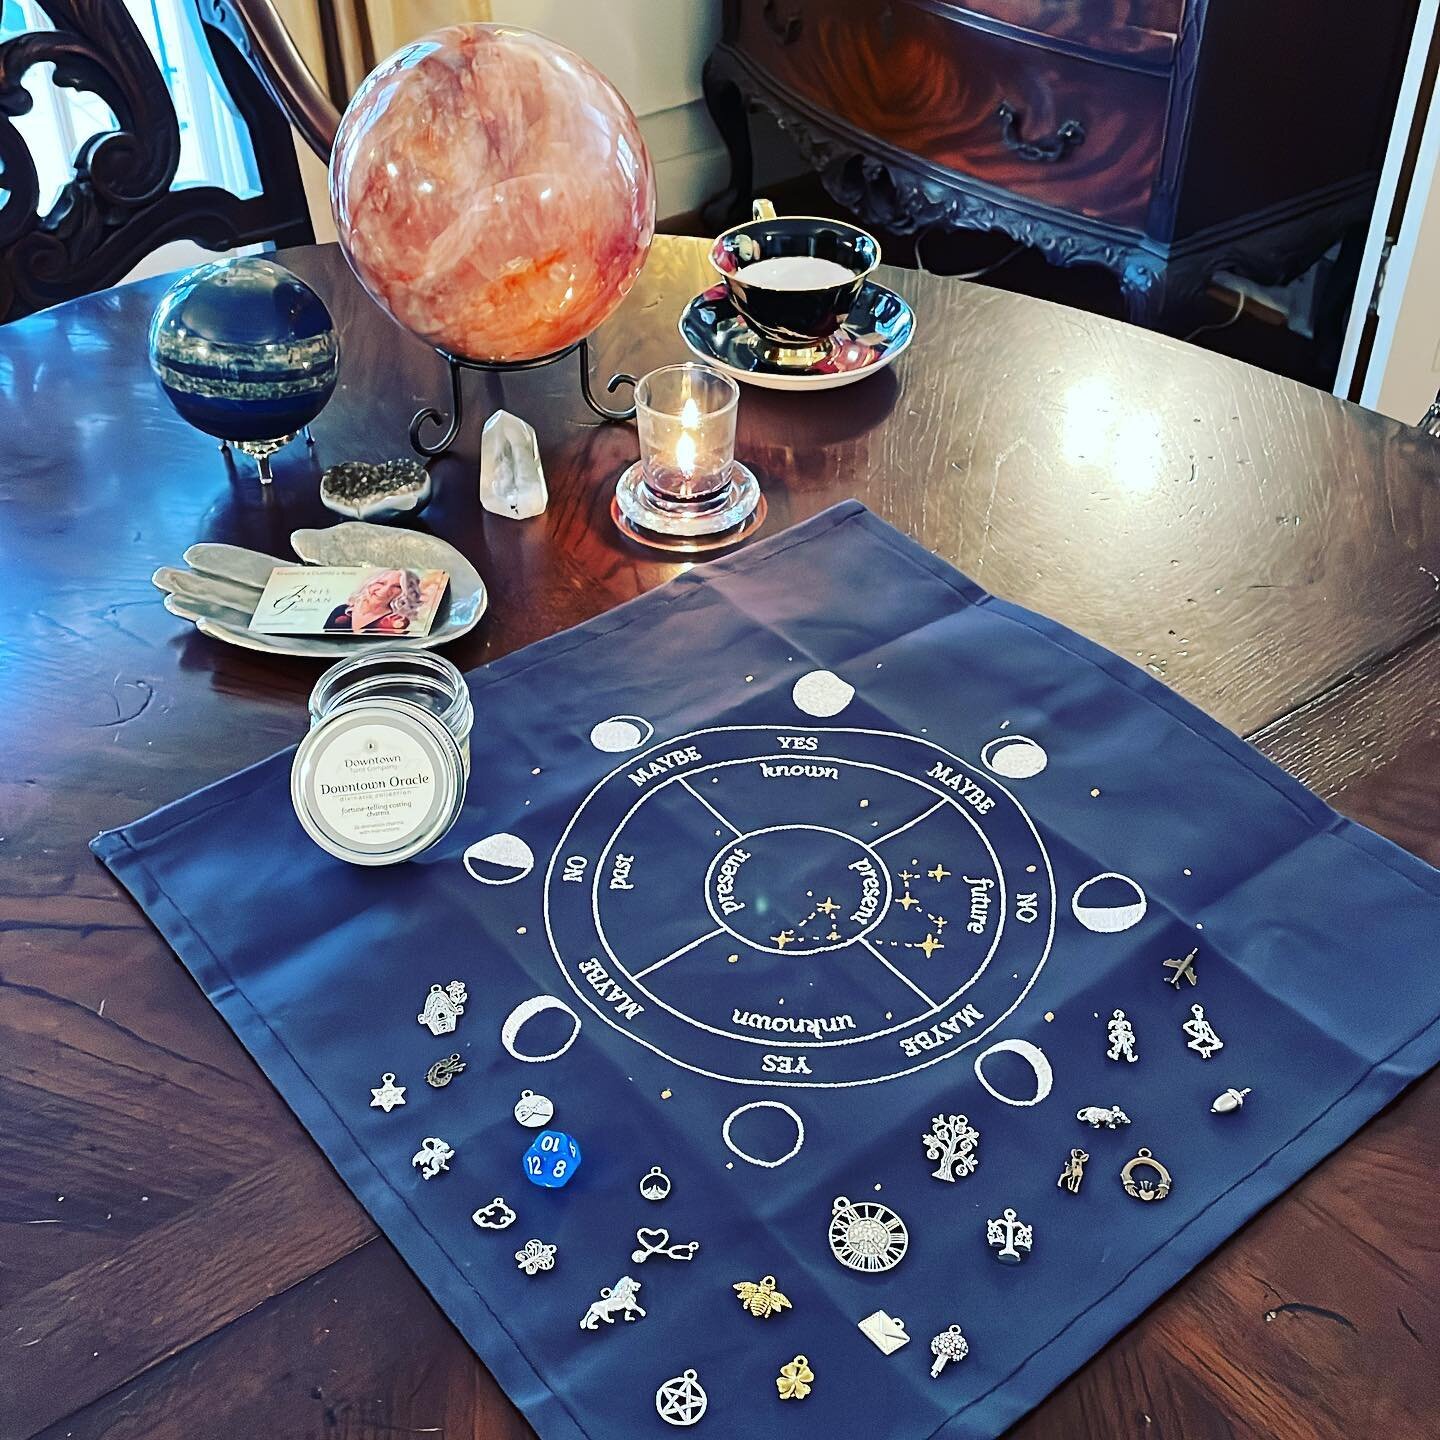 &bull; new casting kit &bull;
So excited to be using this awesome new casting kit, the &ldquo;Downtown Oracle&rdquo; and cloth from the Downtown Tarot Company&rsquo;s &ldquo;divinatio collection&rdquo;! Woot! #dowhatyoulove #divination #fortunetellin